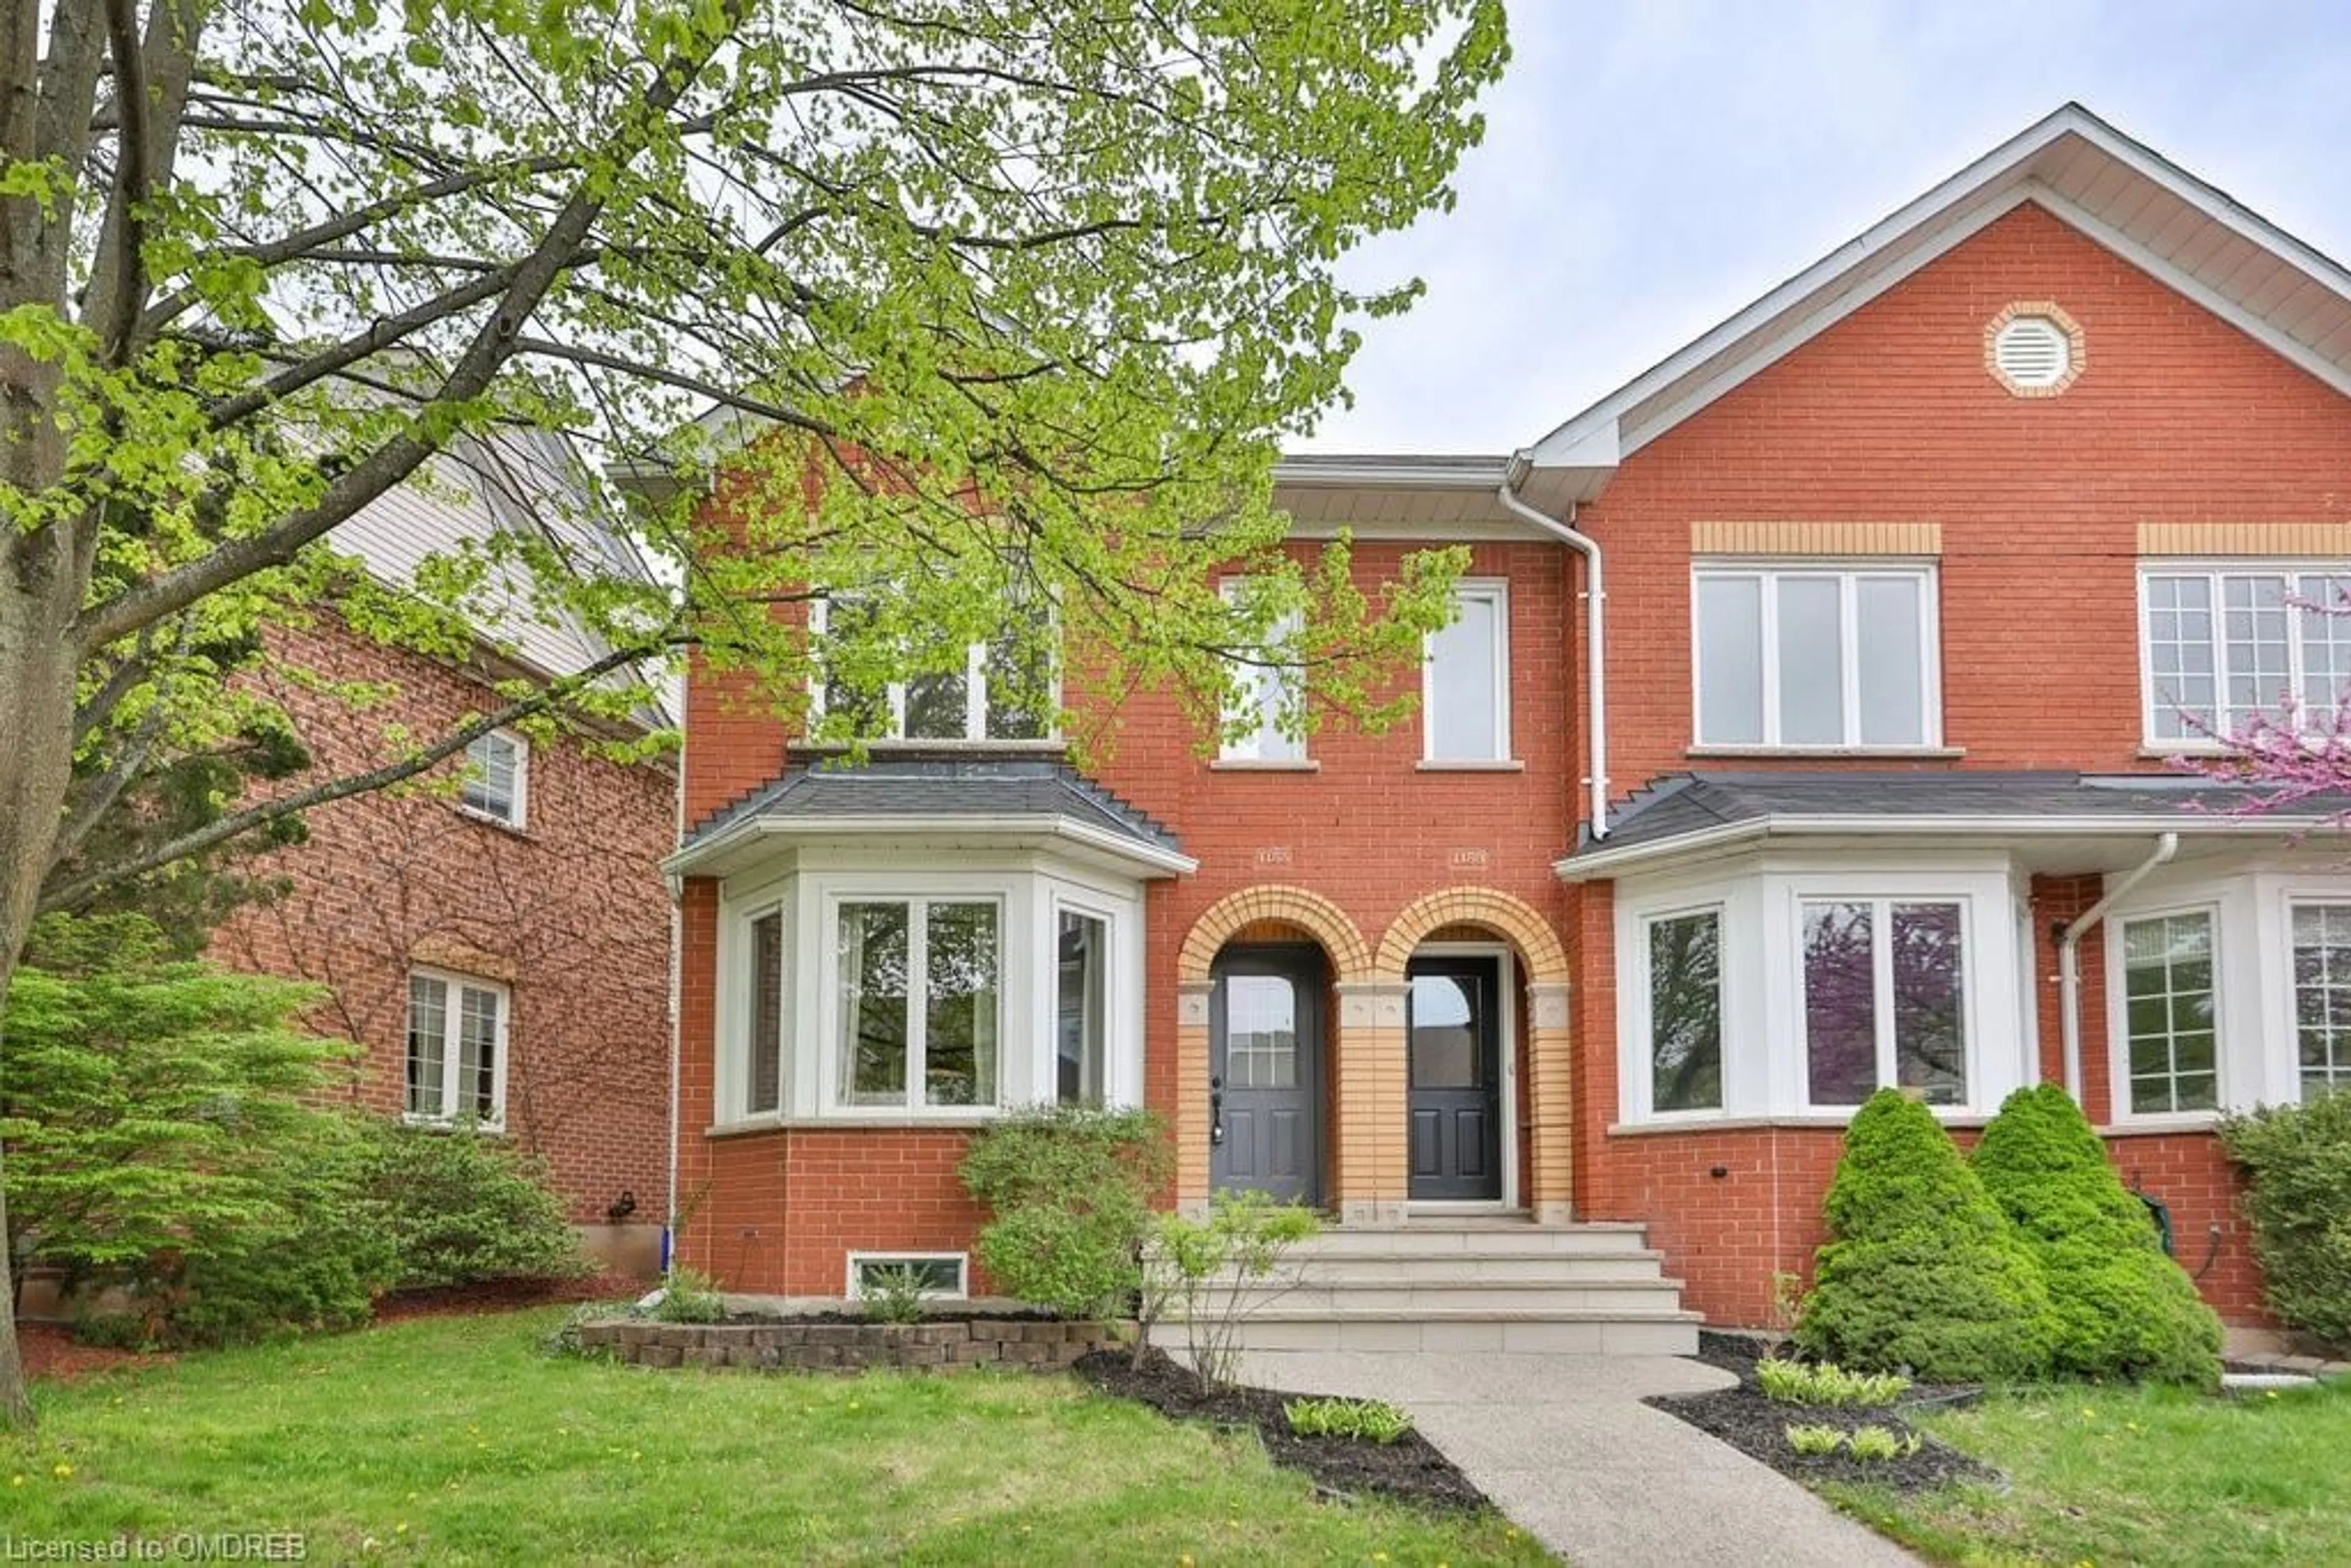 Home with brick exterior material for 1155 Treetop Terr, Oakville Ontario L6M 3L3